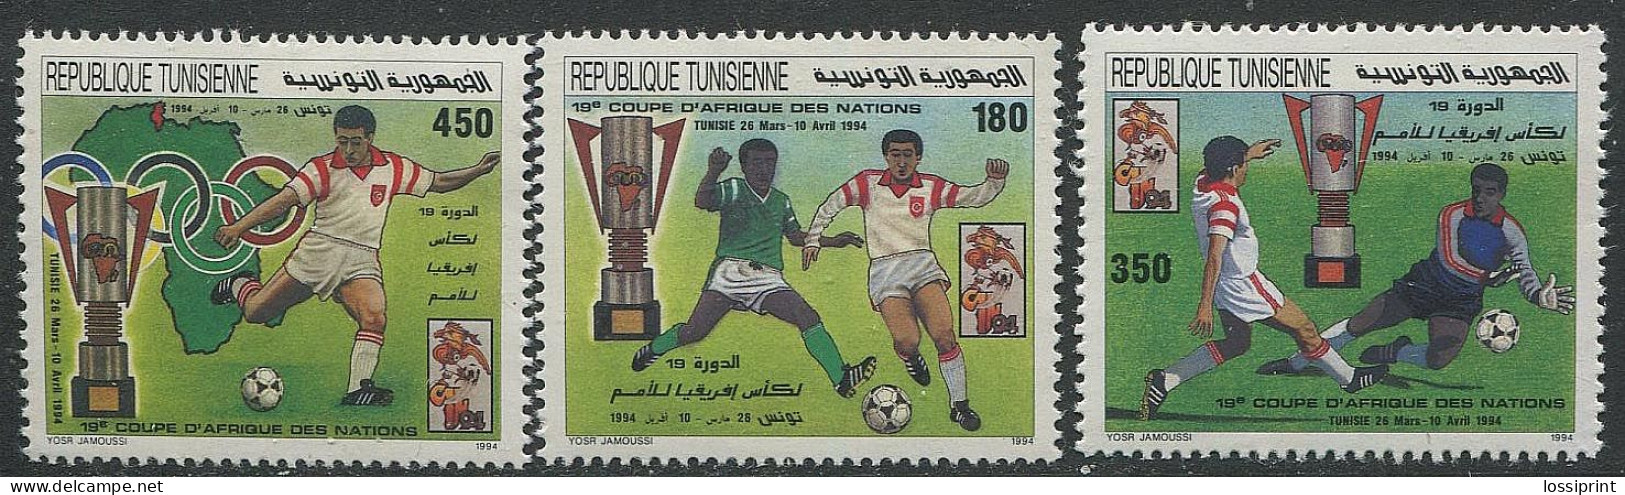 Tunisie:Tunisia:Unused Stamps Serie African Cup, Football, Soccer, 1994, MNH - Coupe D'Afrique Des Nations